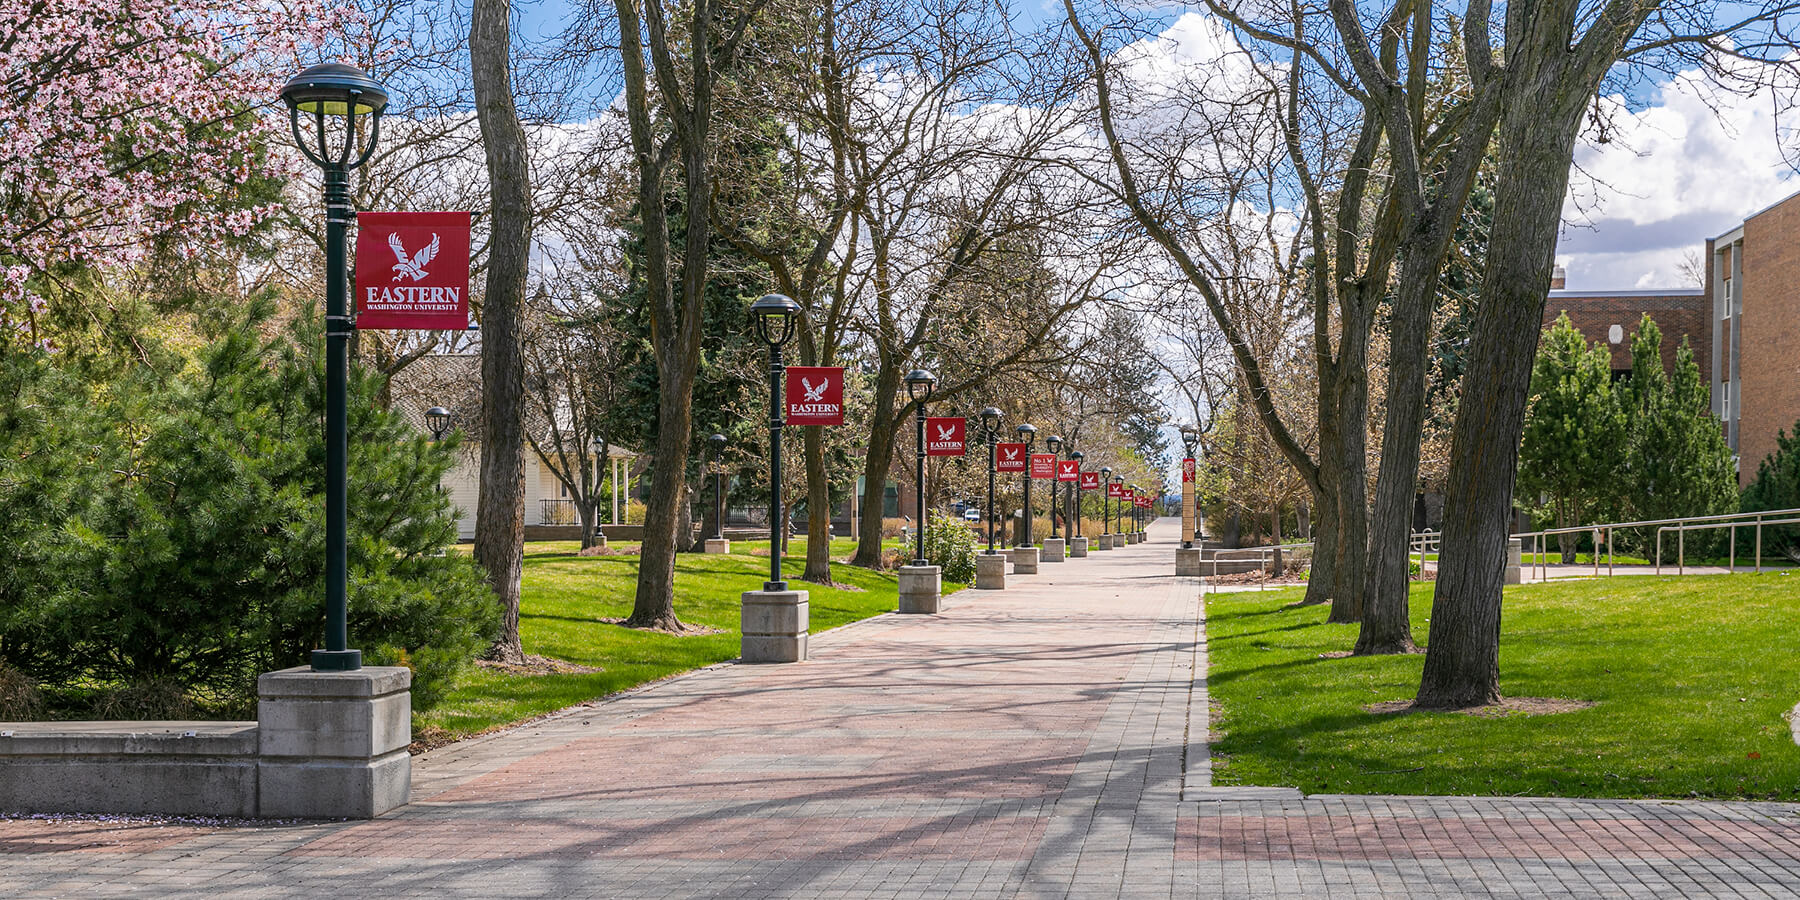 Walkway on campus lined with EWU banners